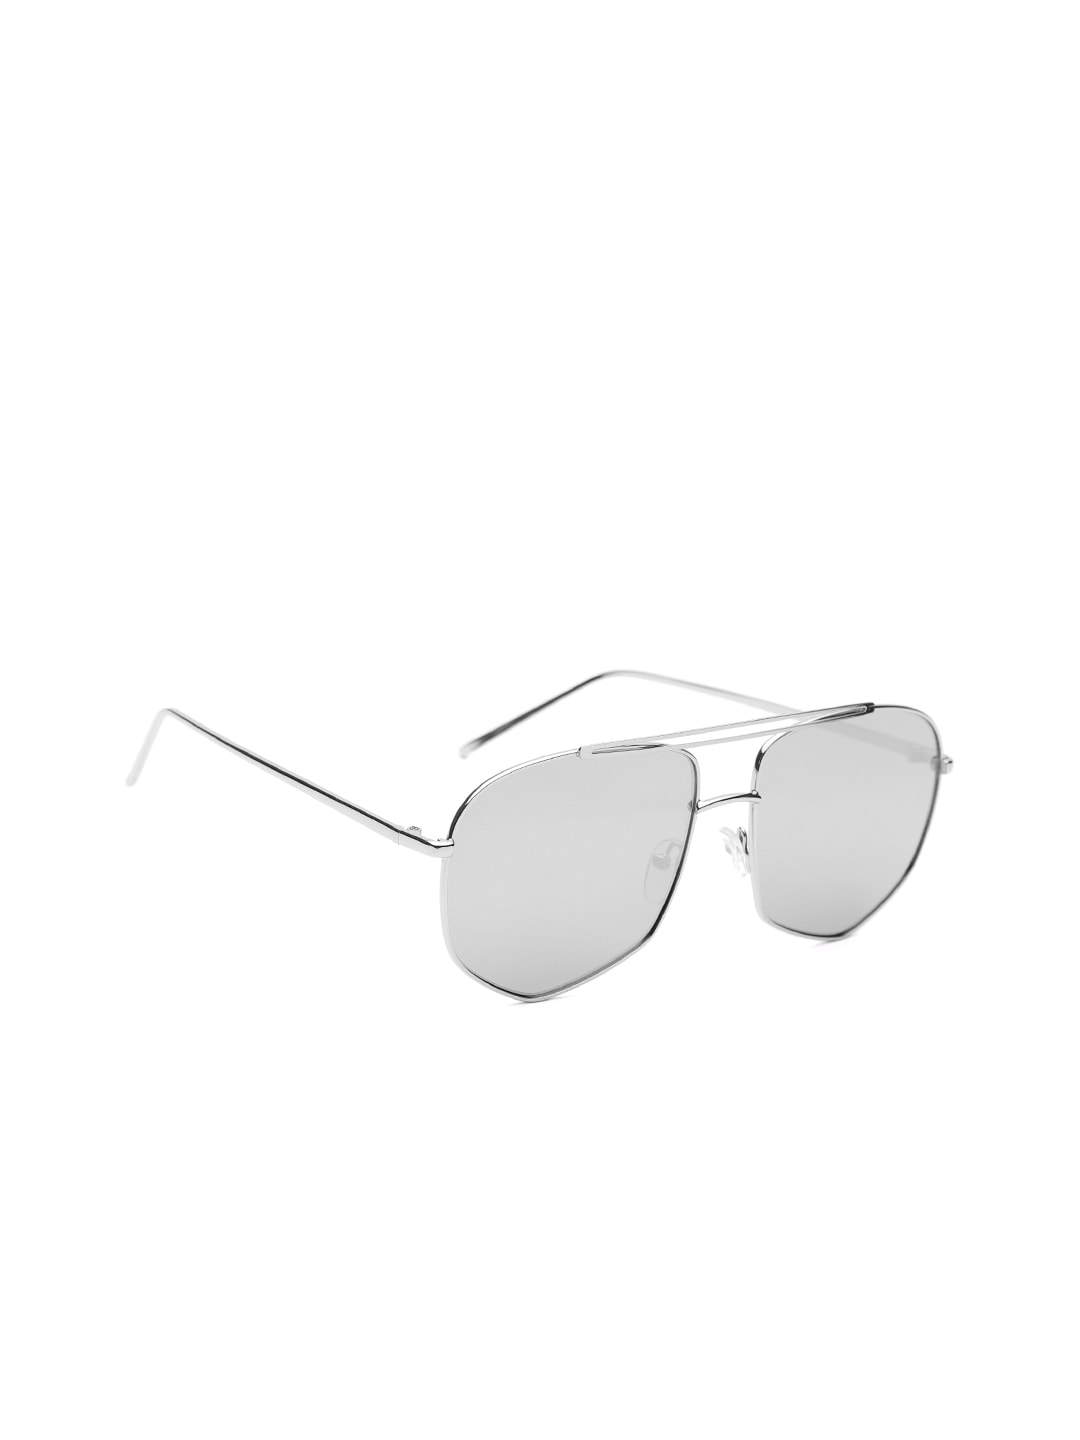 The Roadster Lifestyle Co Unisex Mirrored Oversized Sunglasses MFB-PN-PS-T10273 Price in India